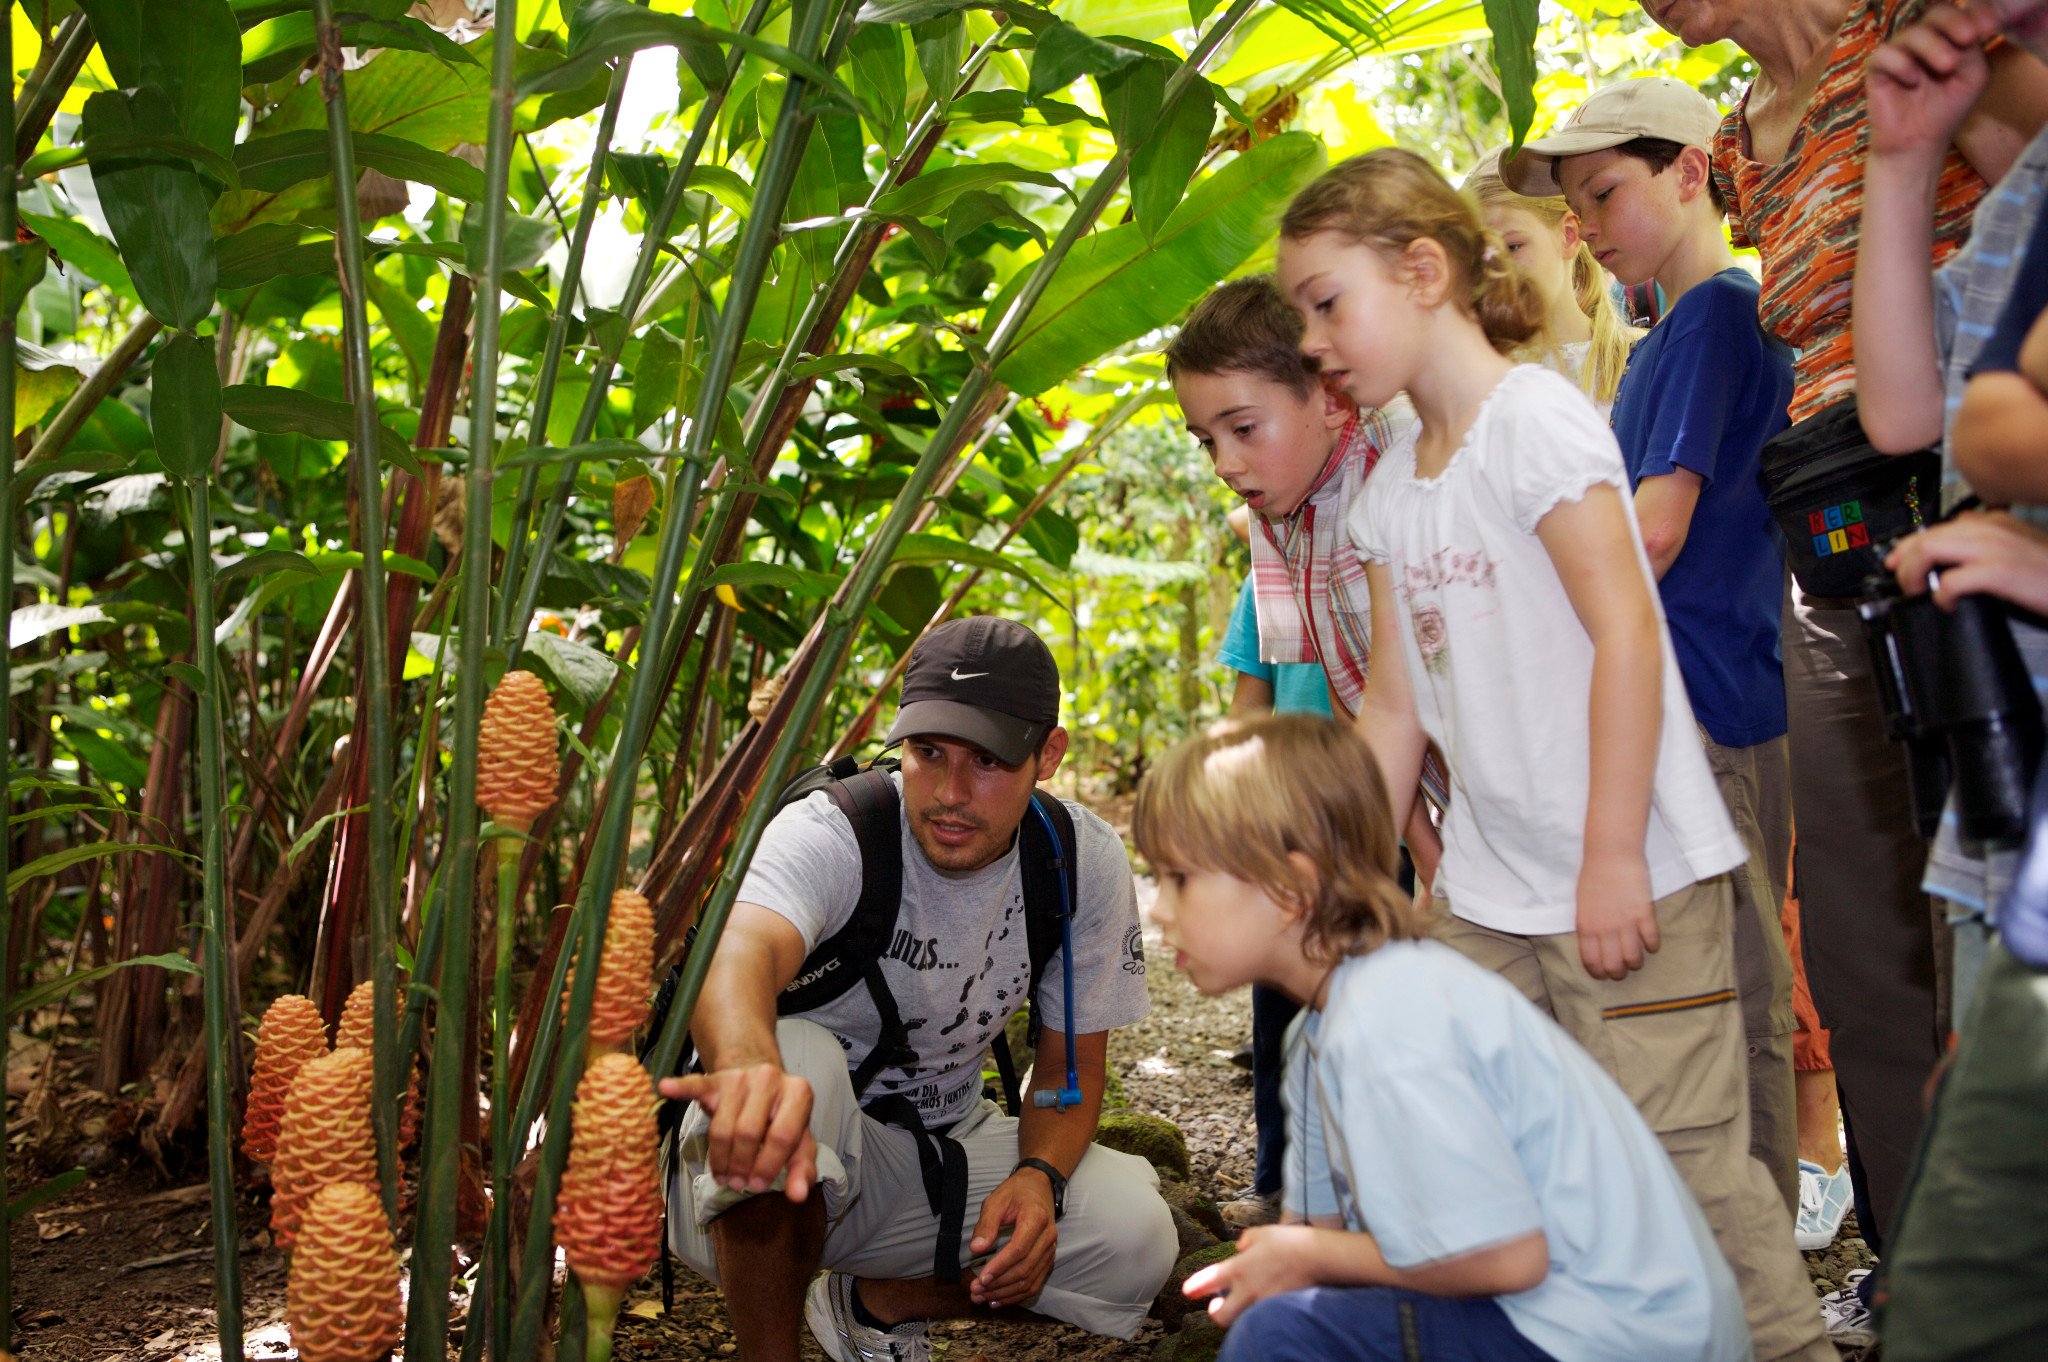 10 years tour operator For Family Reisen - Group trip for families in Costa Rica - children marvel at plants in Costa Rica with local guide